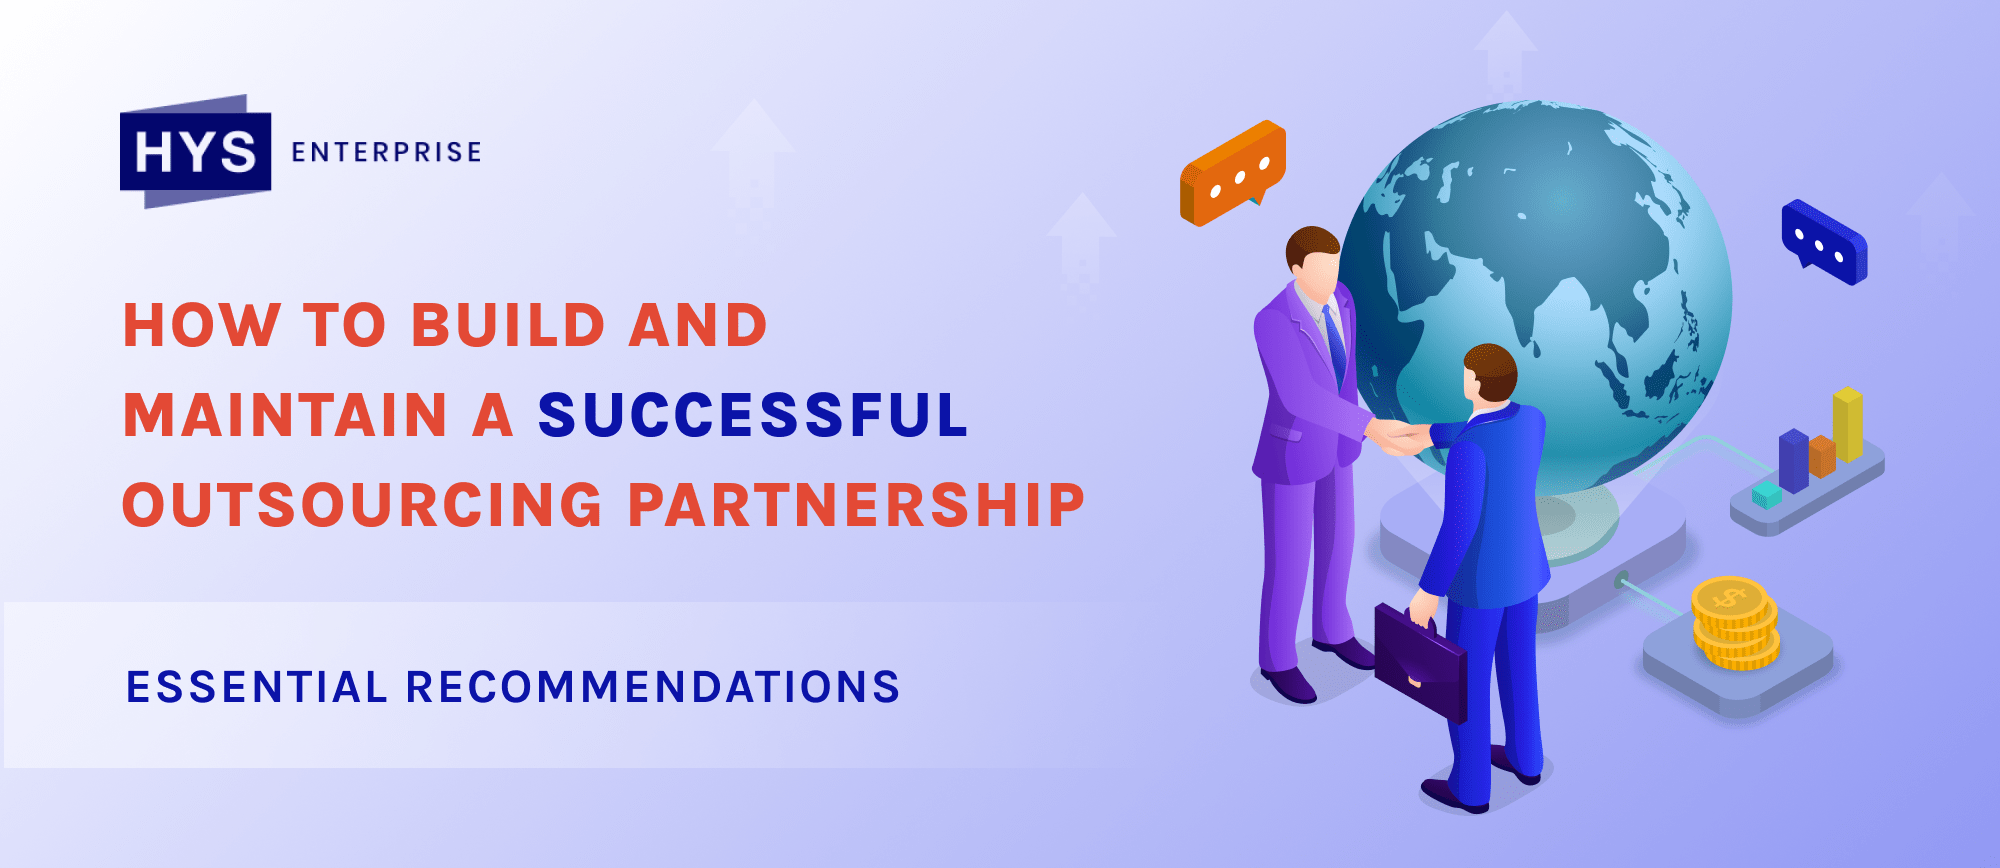 How to Build and Maintain a Successful Outsourcing Partnership